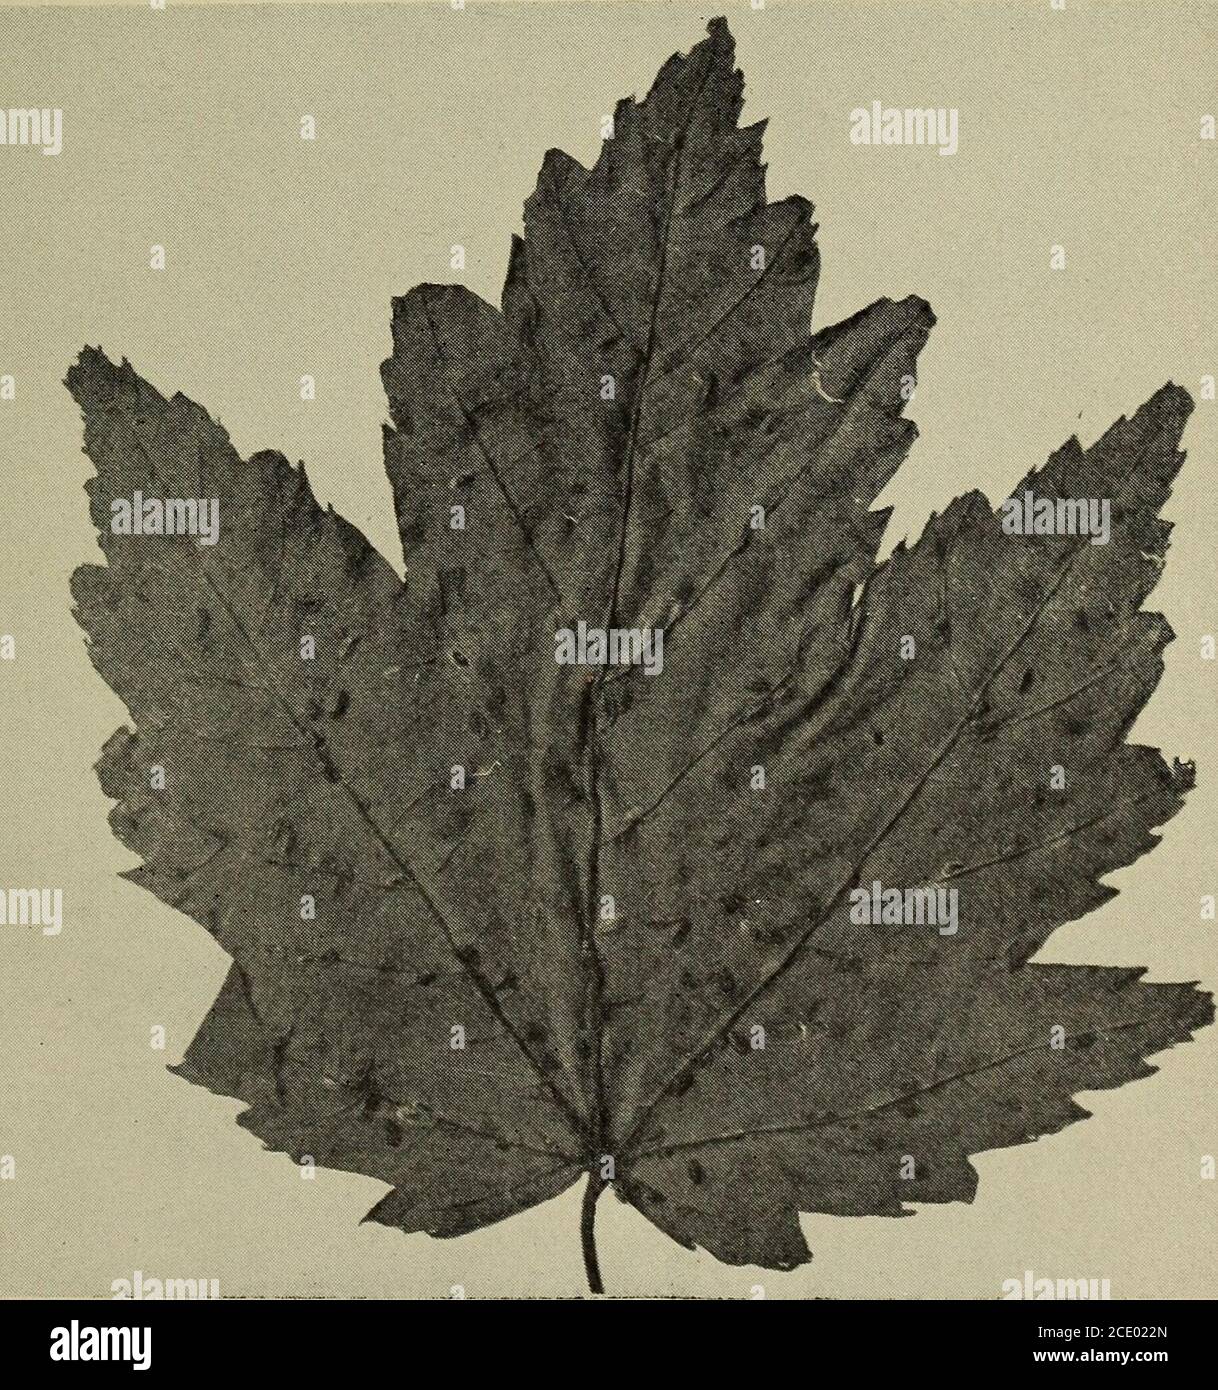 . Annual report of the Regents . Fig. 17 Work of the elm-leaf miner (original).. Fig. 20 Young of pulvinaria innumerabilis on maple leaf (original). IN DEX The superior figure points to the exact place on the page in ninths; e. g.173^ means one ninth of the way down page 173. Abbot, John, cited, 173^; referred to, 193*. abbotii, Thyreus, 257*^. abietis, Chermes, 26o^ Academy of natural sciences ofPhiladelphia, Journal cited, i6o Acetate of lead, 225^, 225^ Acknowledgments, I56*-57^ Adalia bipunctata, 243/, 247, 255 Adams, M. F., insects from, 255,255, 256-; 256, 256^ 256, 256,256, 257, 26ol Stock Photo